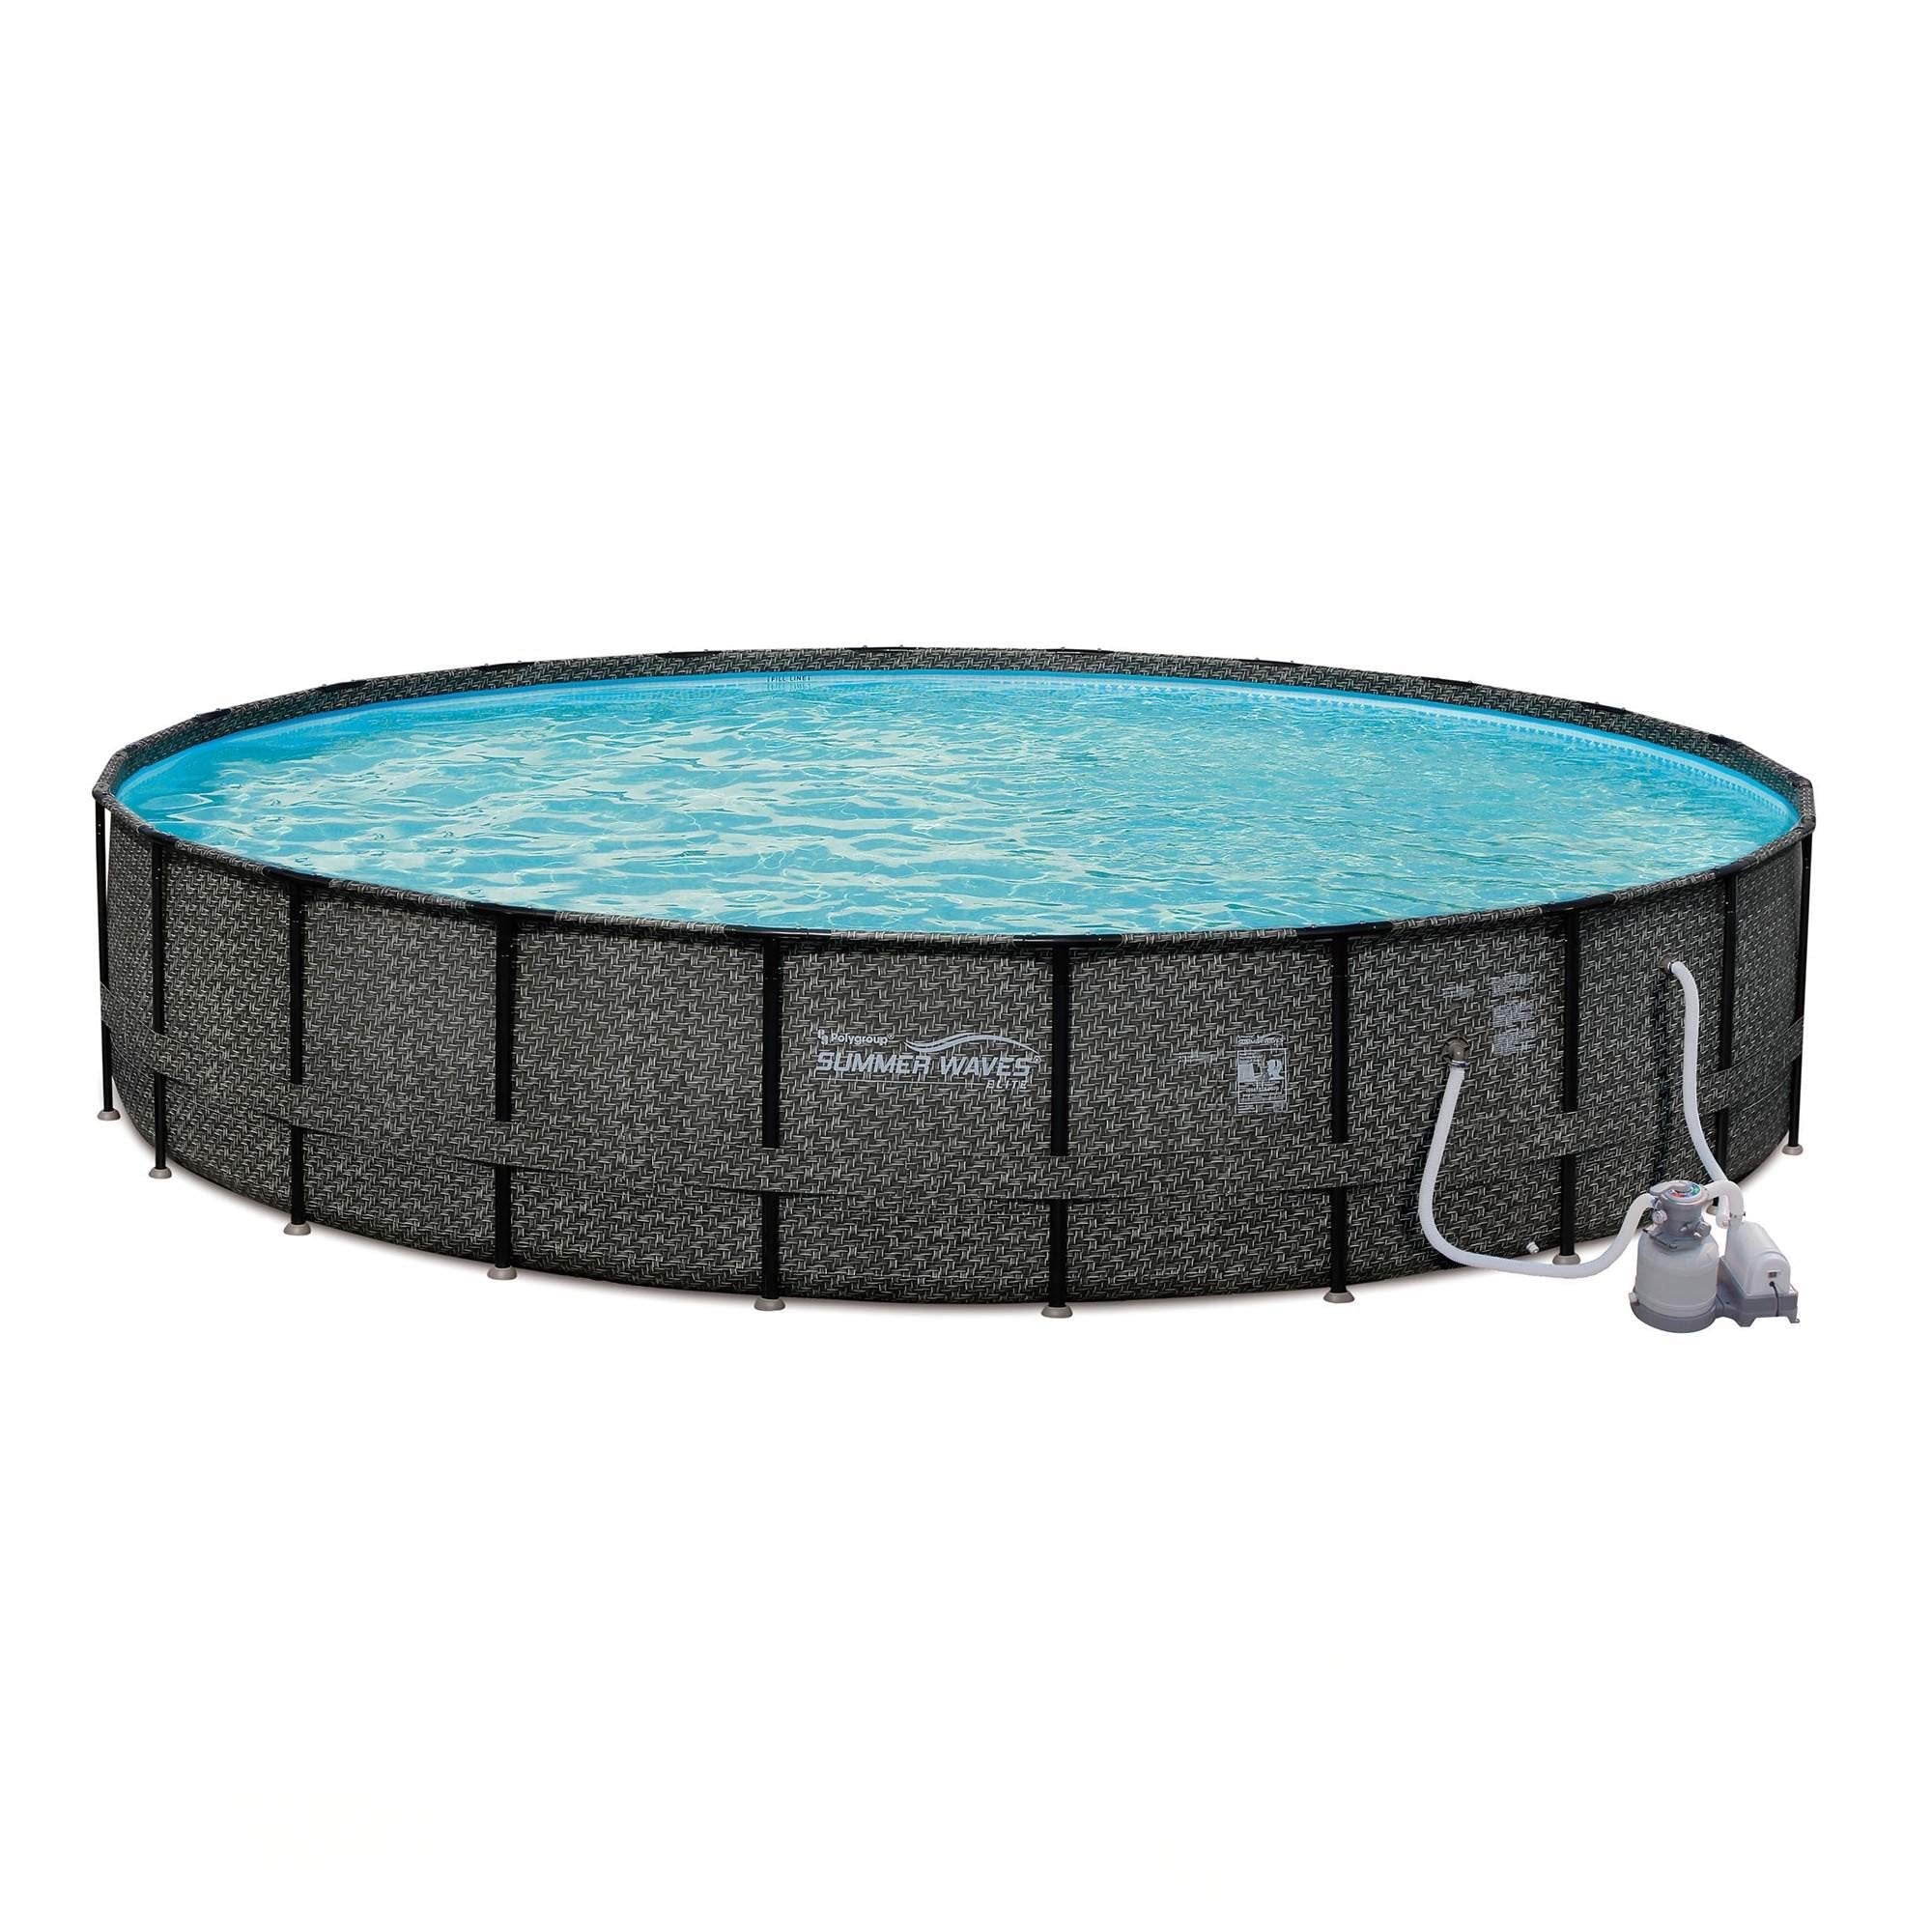 Summer Waves P4A024521 24ft x 52in Elite Round Above Ground Frame Outdoor Swimming Pool Set